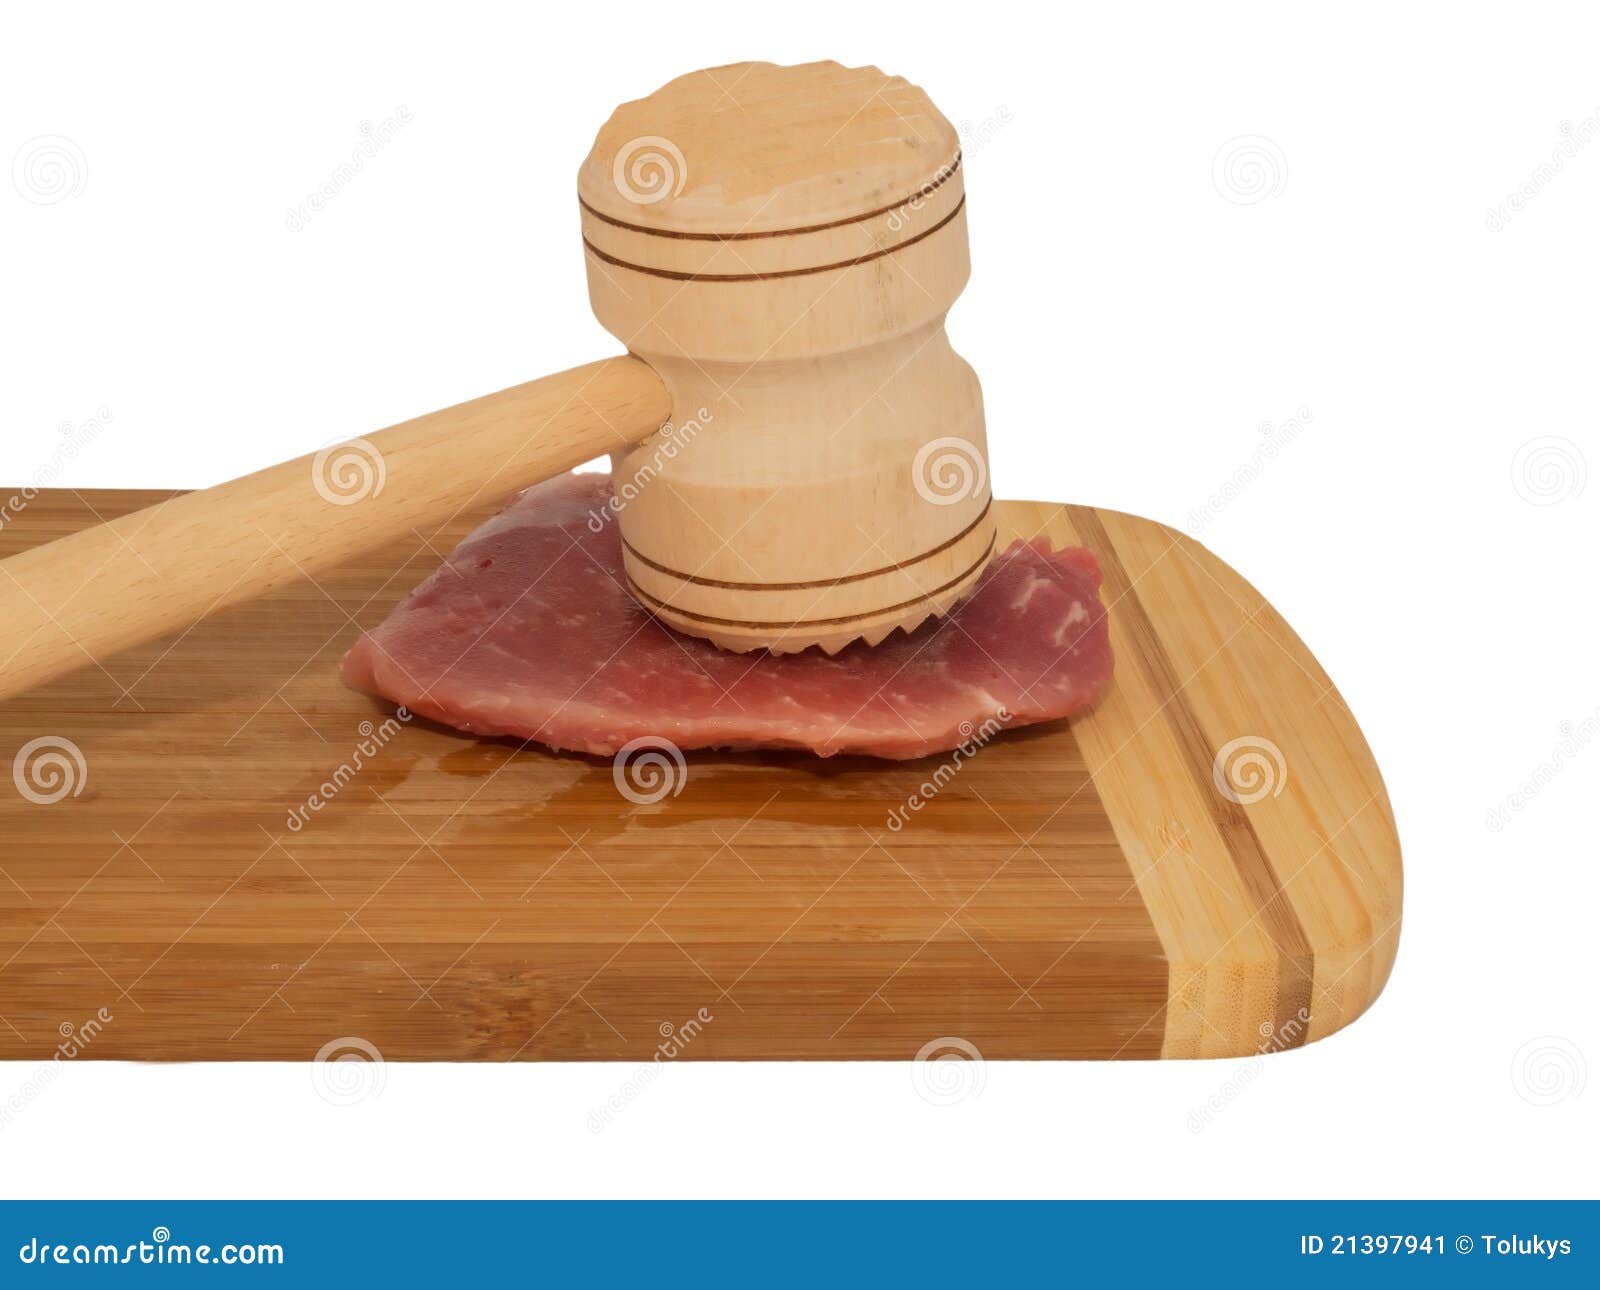 Hammer for the Meat Stock Image - Image of handle, market: 21397941